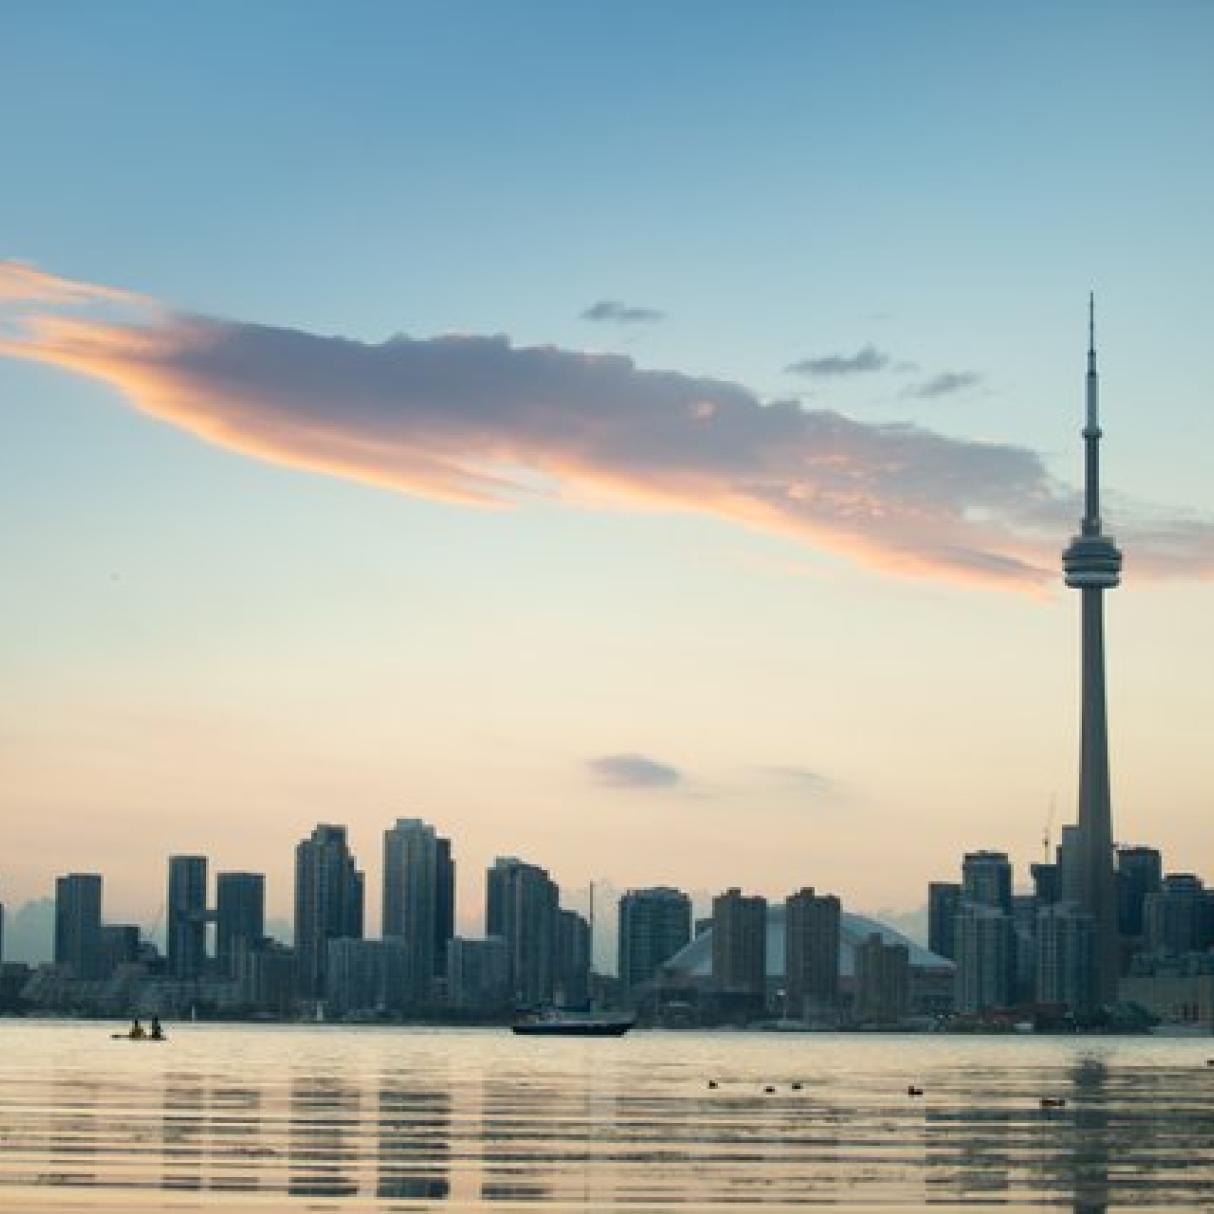 The Toronto city skyline, with the CN Tower visible